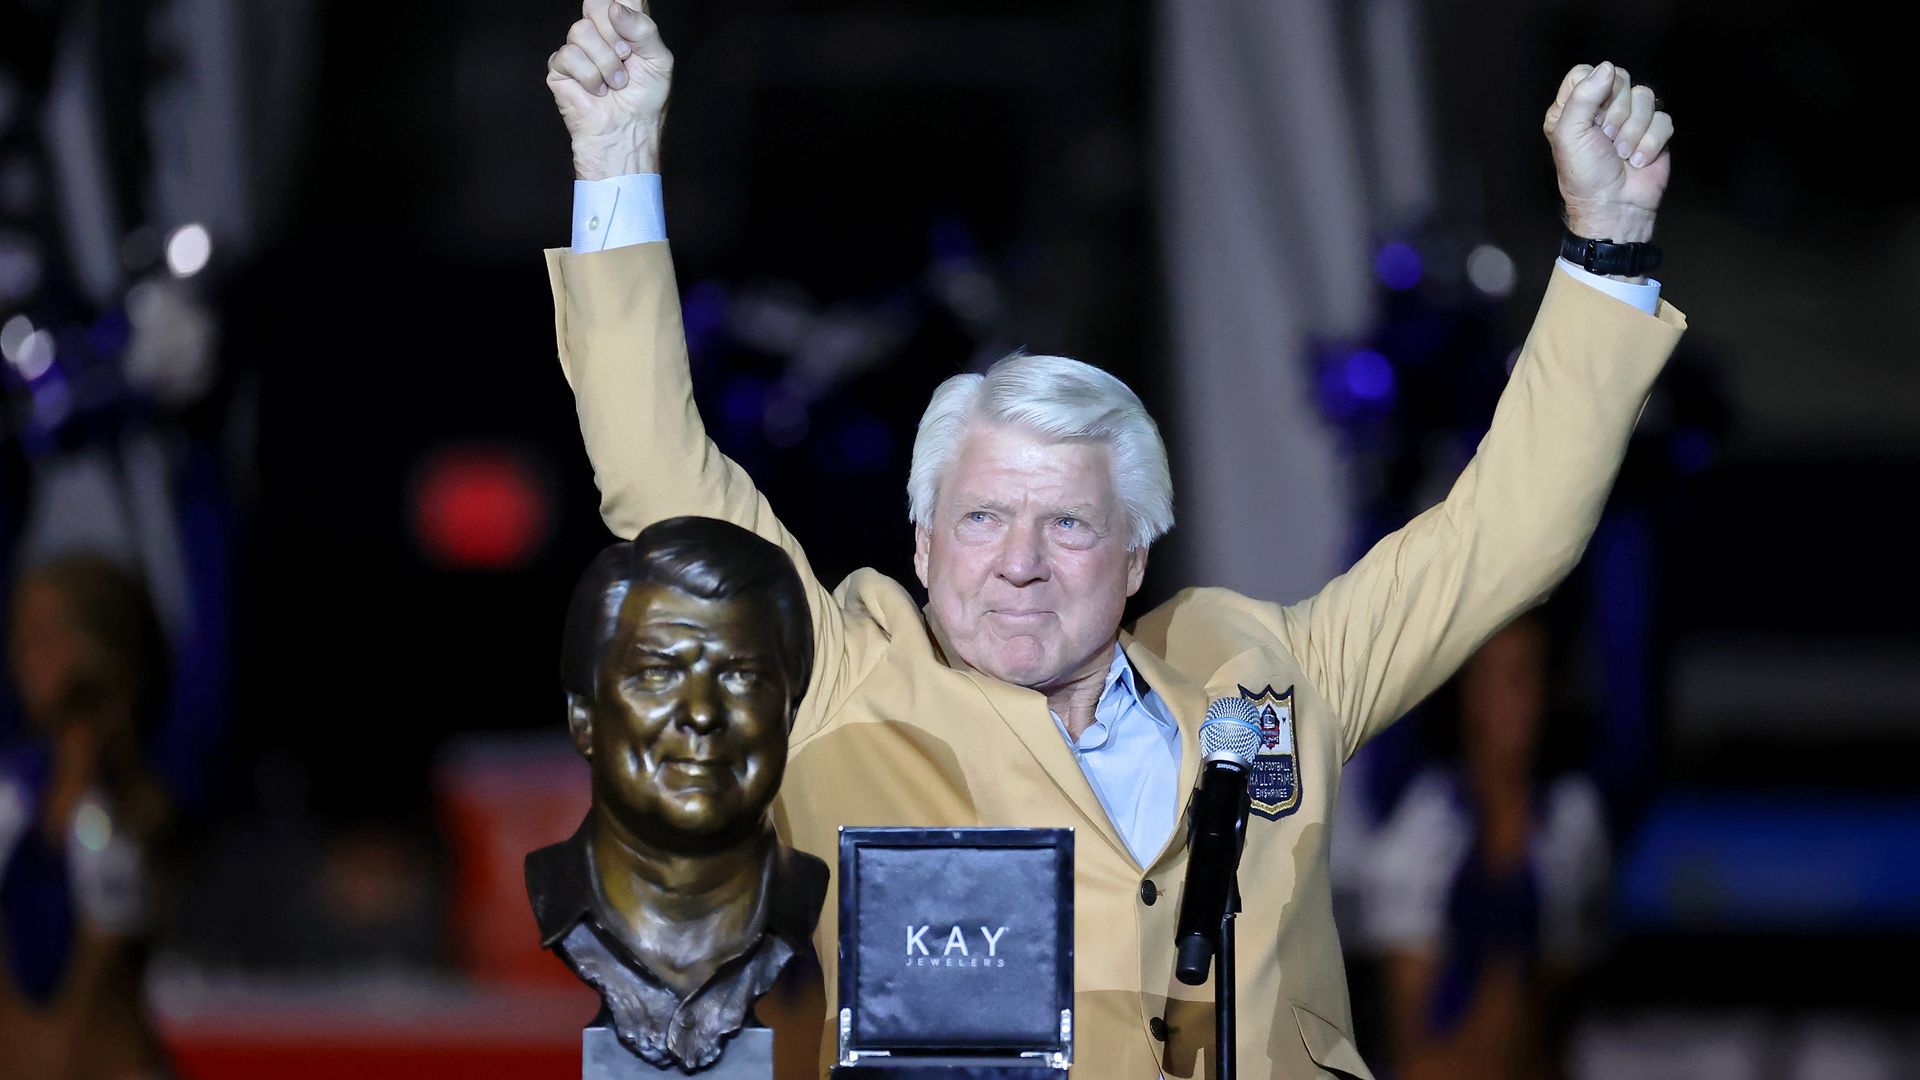 the jimmy johnson dallas cowboys ring of honor celebration will be shown in entirety on espn